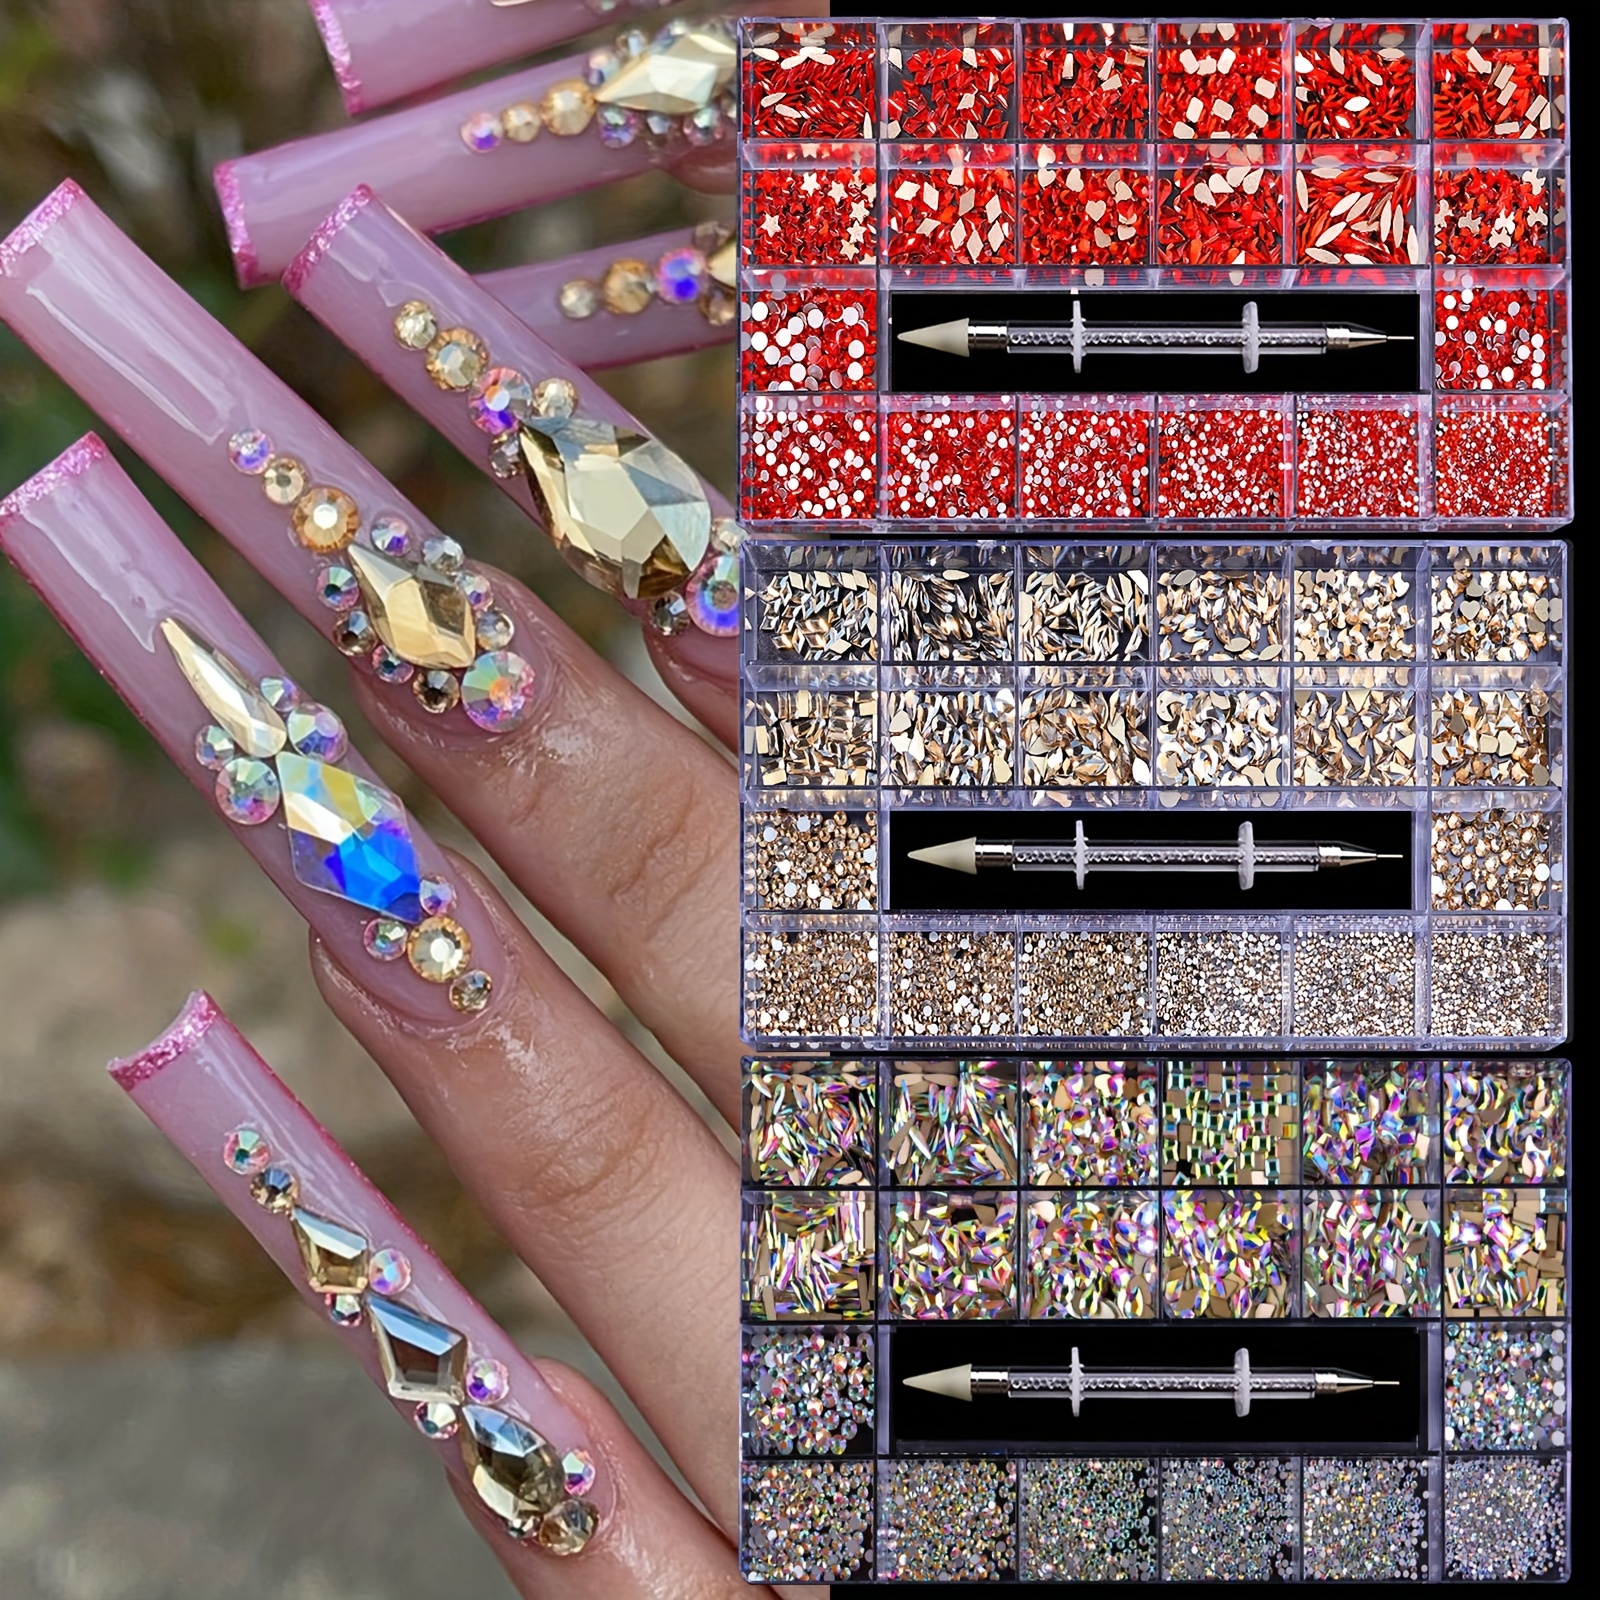 

Luxurious 21-grid Nail Art Kit With Pickup Pen - Mixed Red & Champagne Glass Crystals, Flat Rhinestones For Stunning Manicures Nail Accessories Nail Charms And Accessories